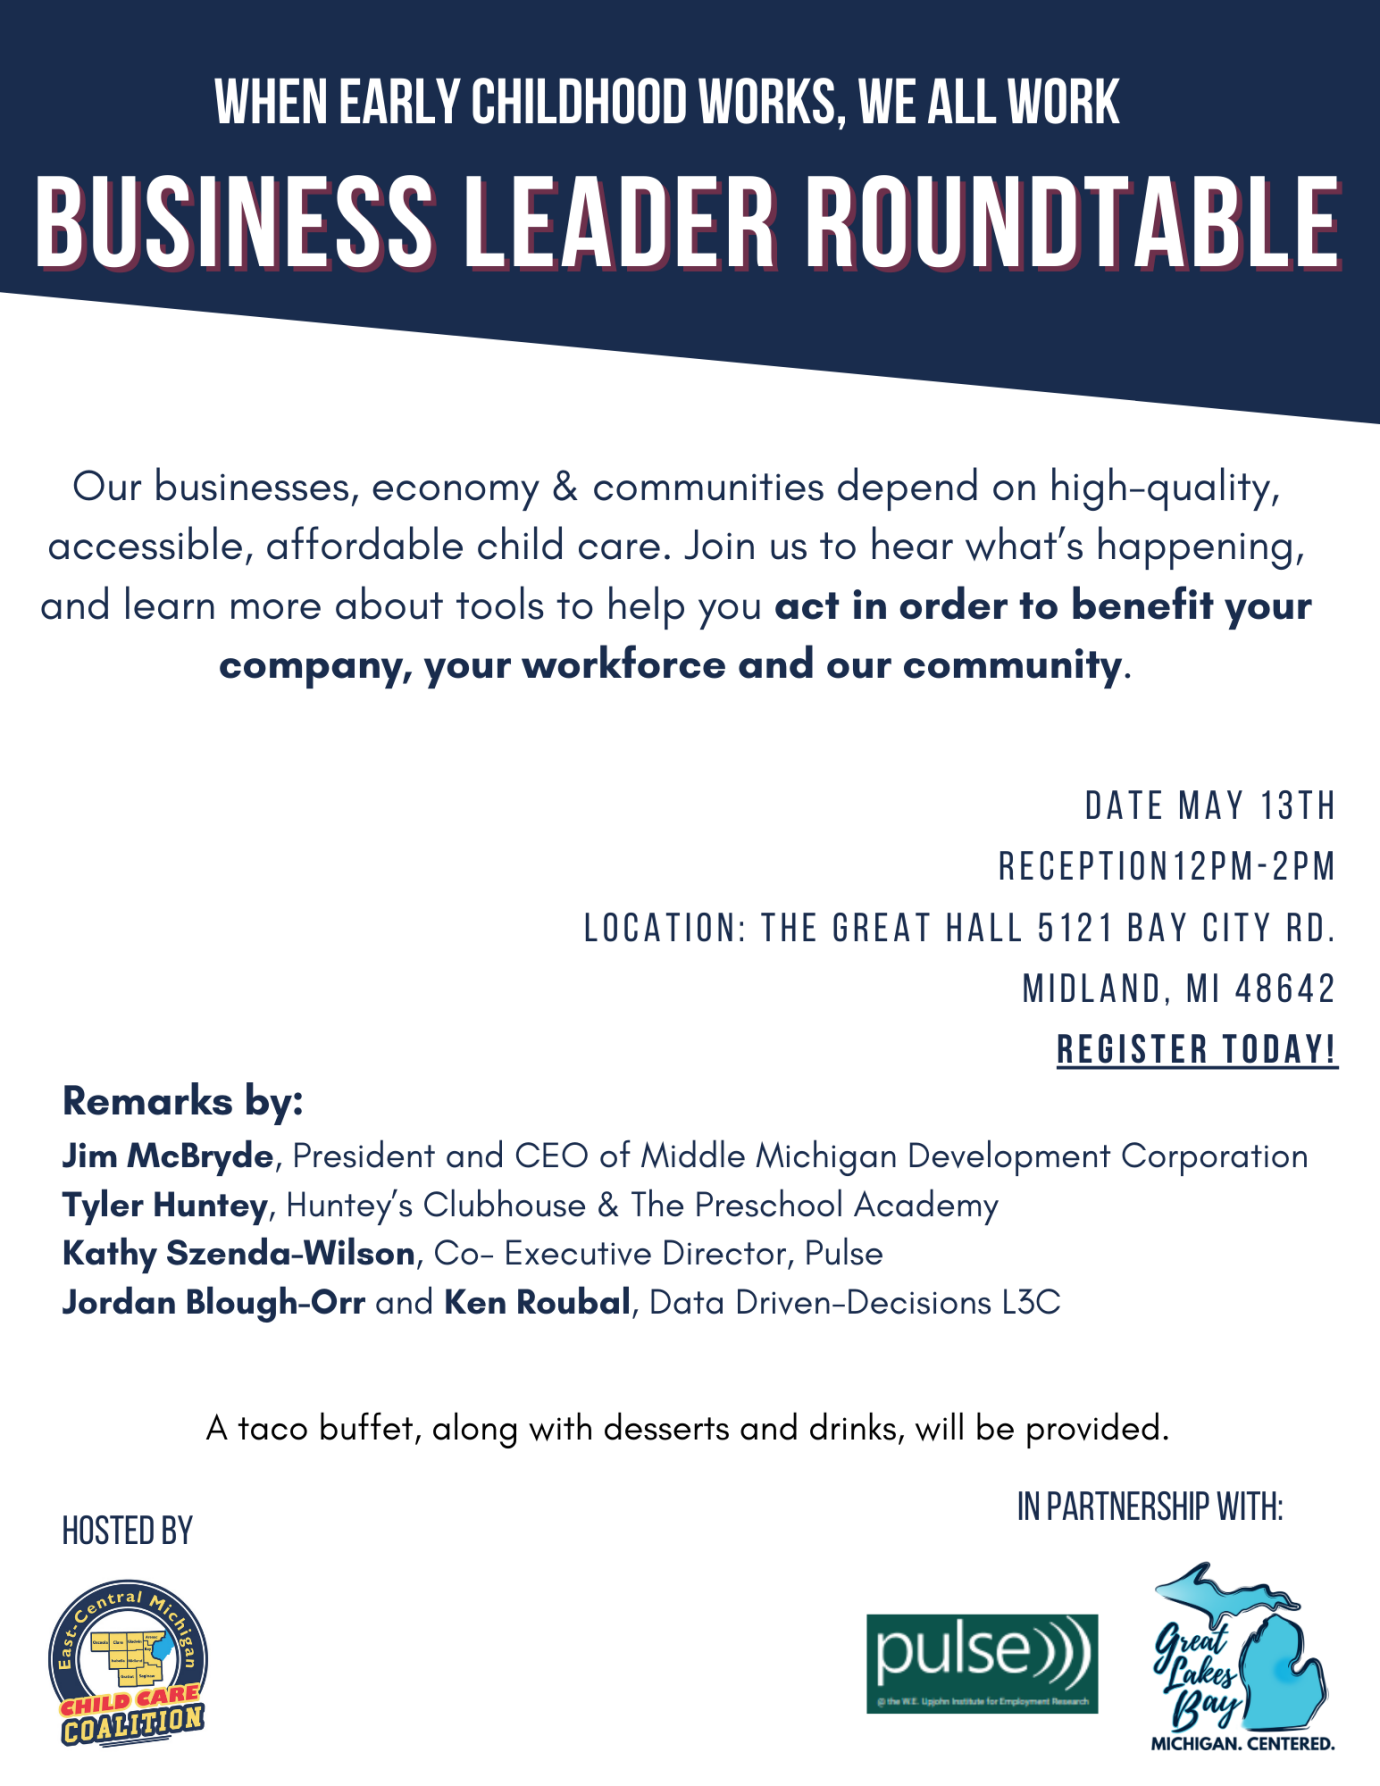 Business Leader Roundtable: Childcare in the Region